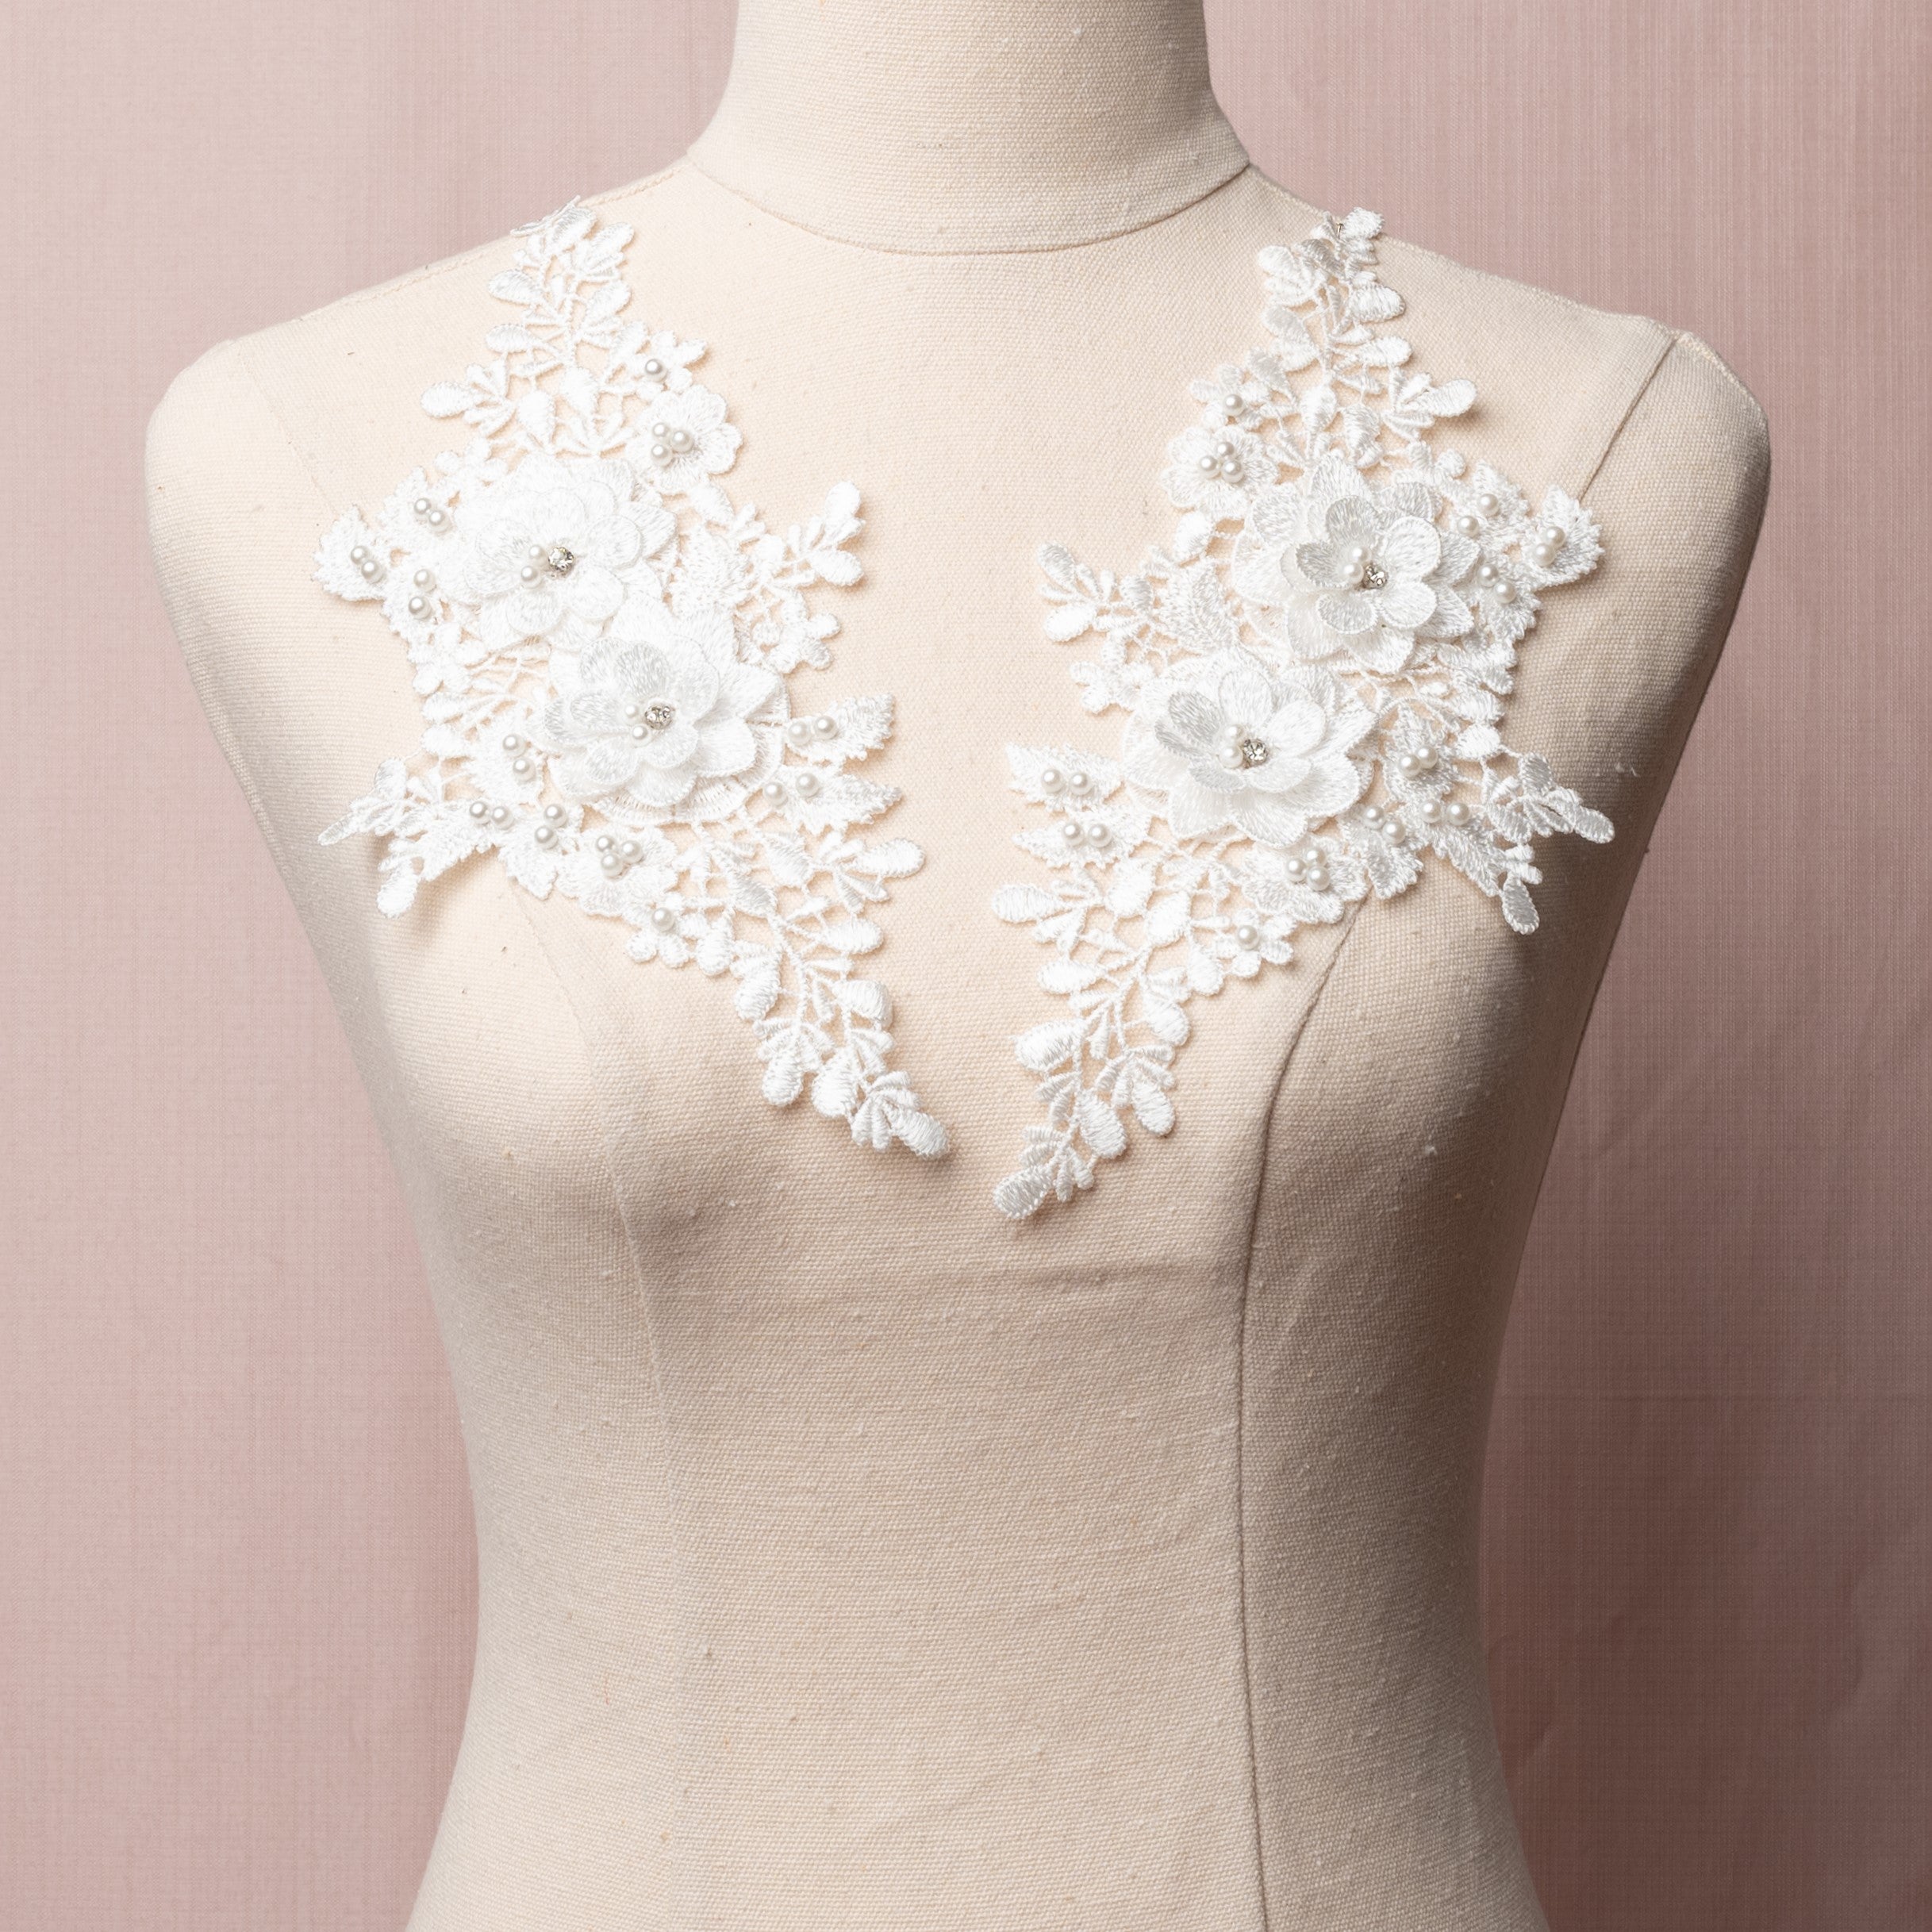 White mirrored pair embroidered applique with 3D flowers.  The applique is embellished with a scattering of white pearls and the 3D flowers have a crystal centre.  The appliques are displayed on a mannequin.